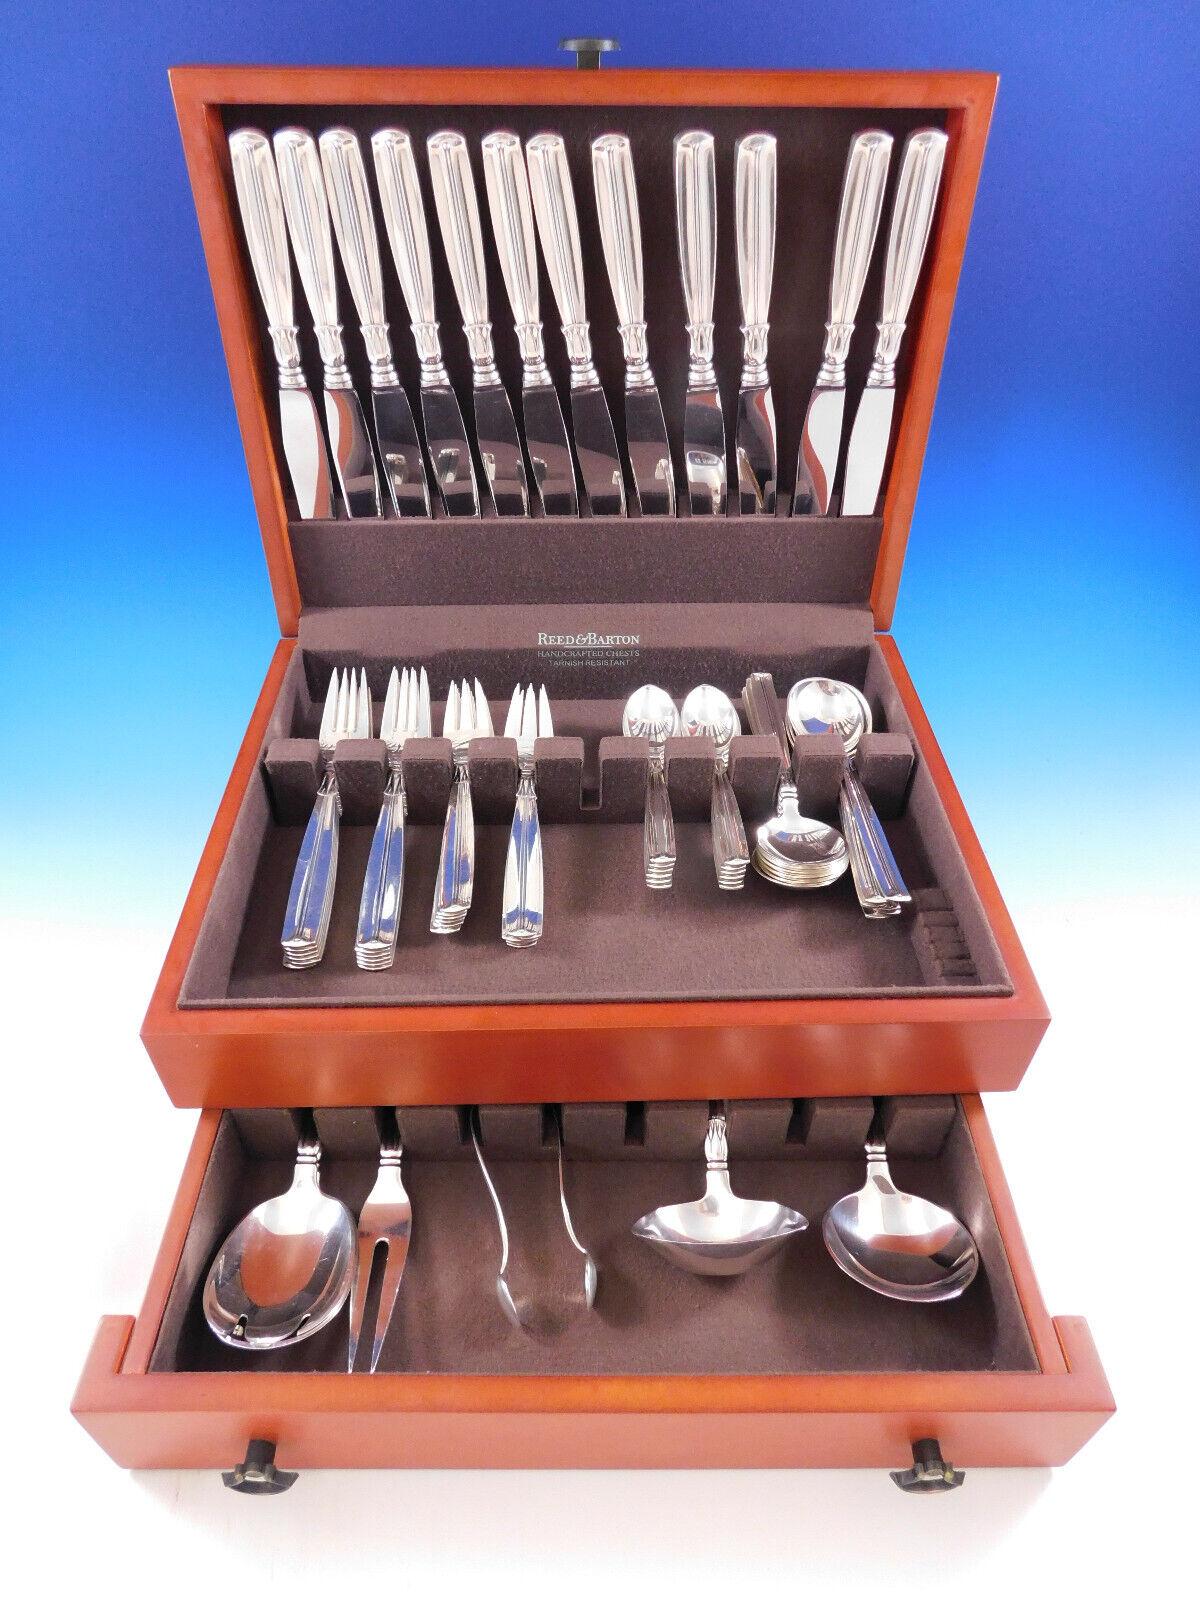 Dinner Size Lotus by W&S Sorensen Danish sterling silver Scandinavian Modern Flatware set, 66 pieces. This set includes:

12 Large Dinner Knives, 10 3/8